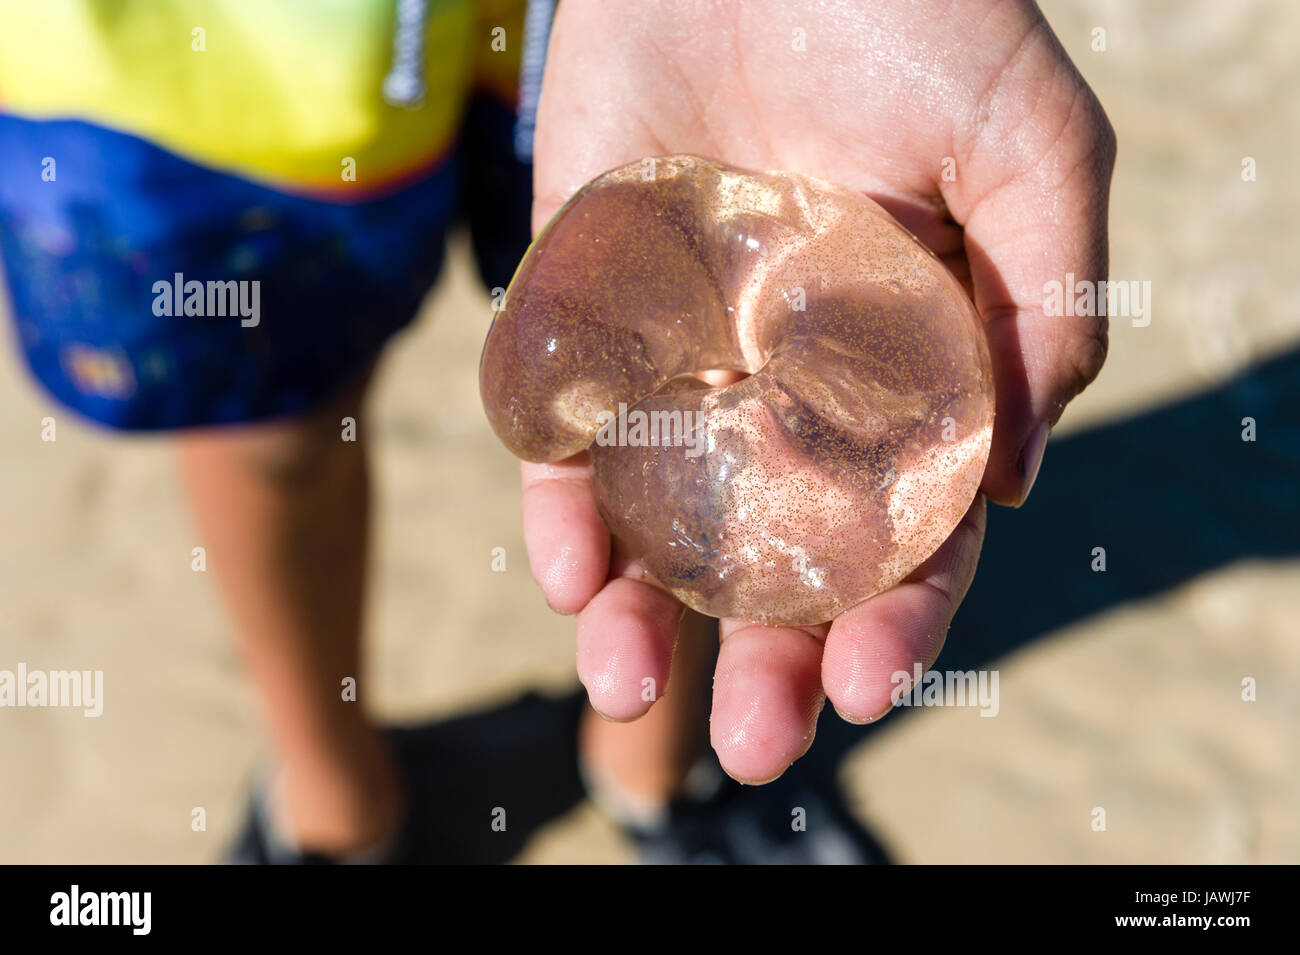 A boy holds a egg case of a Conical Sand Snail. Stock Photo